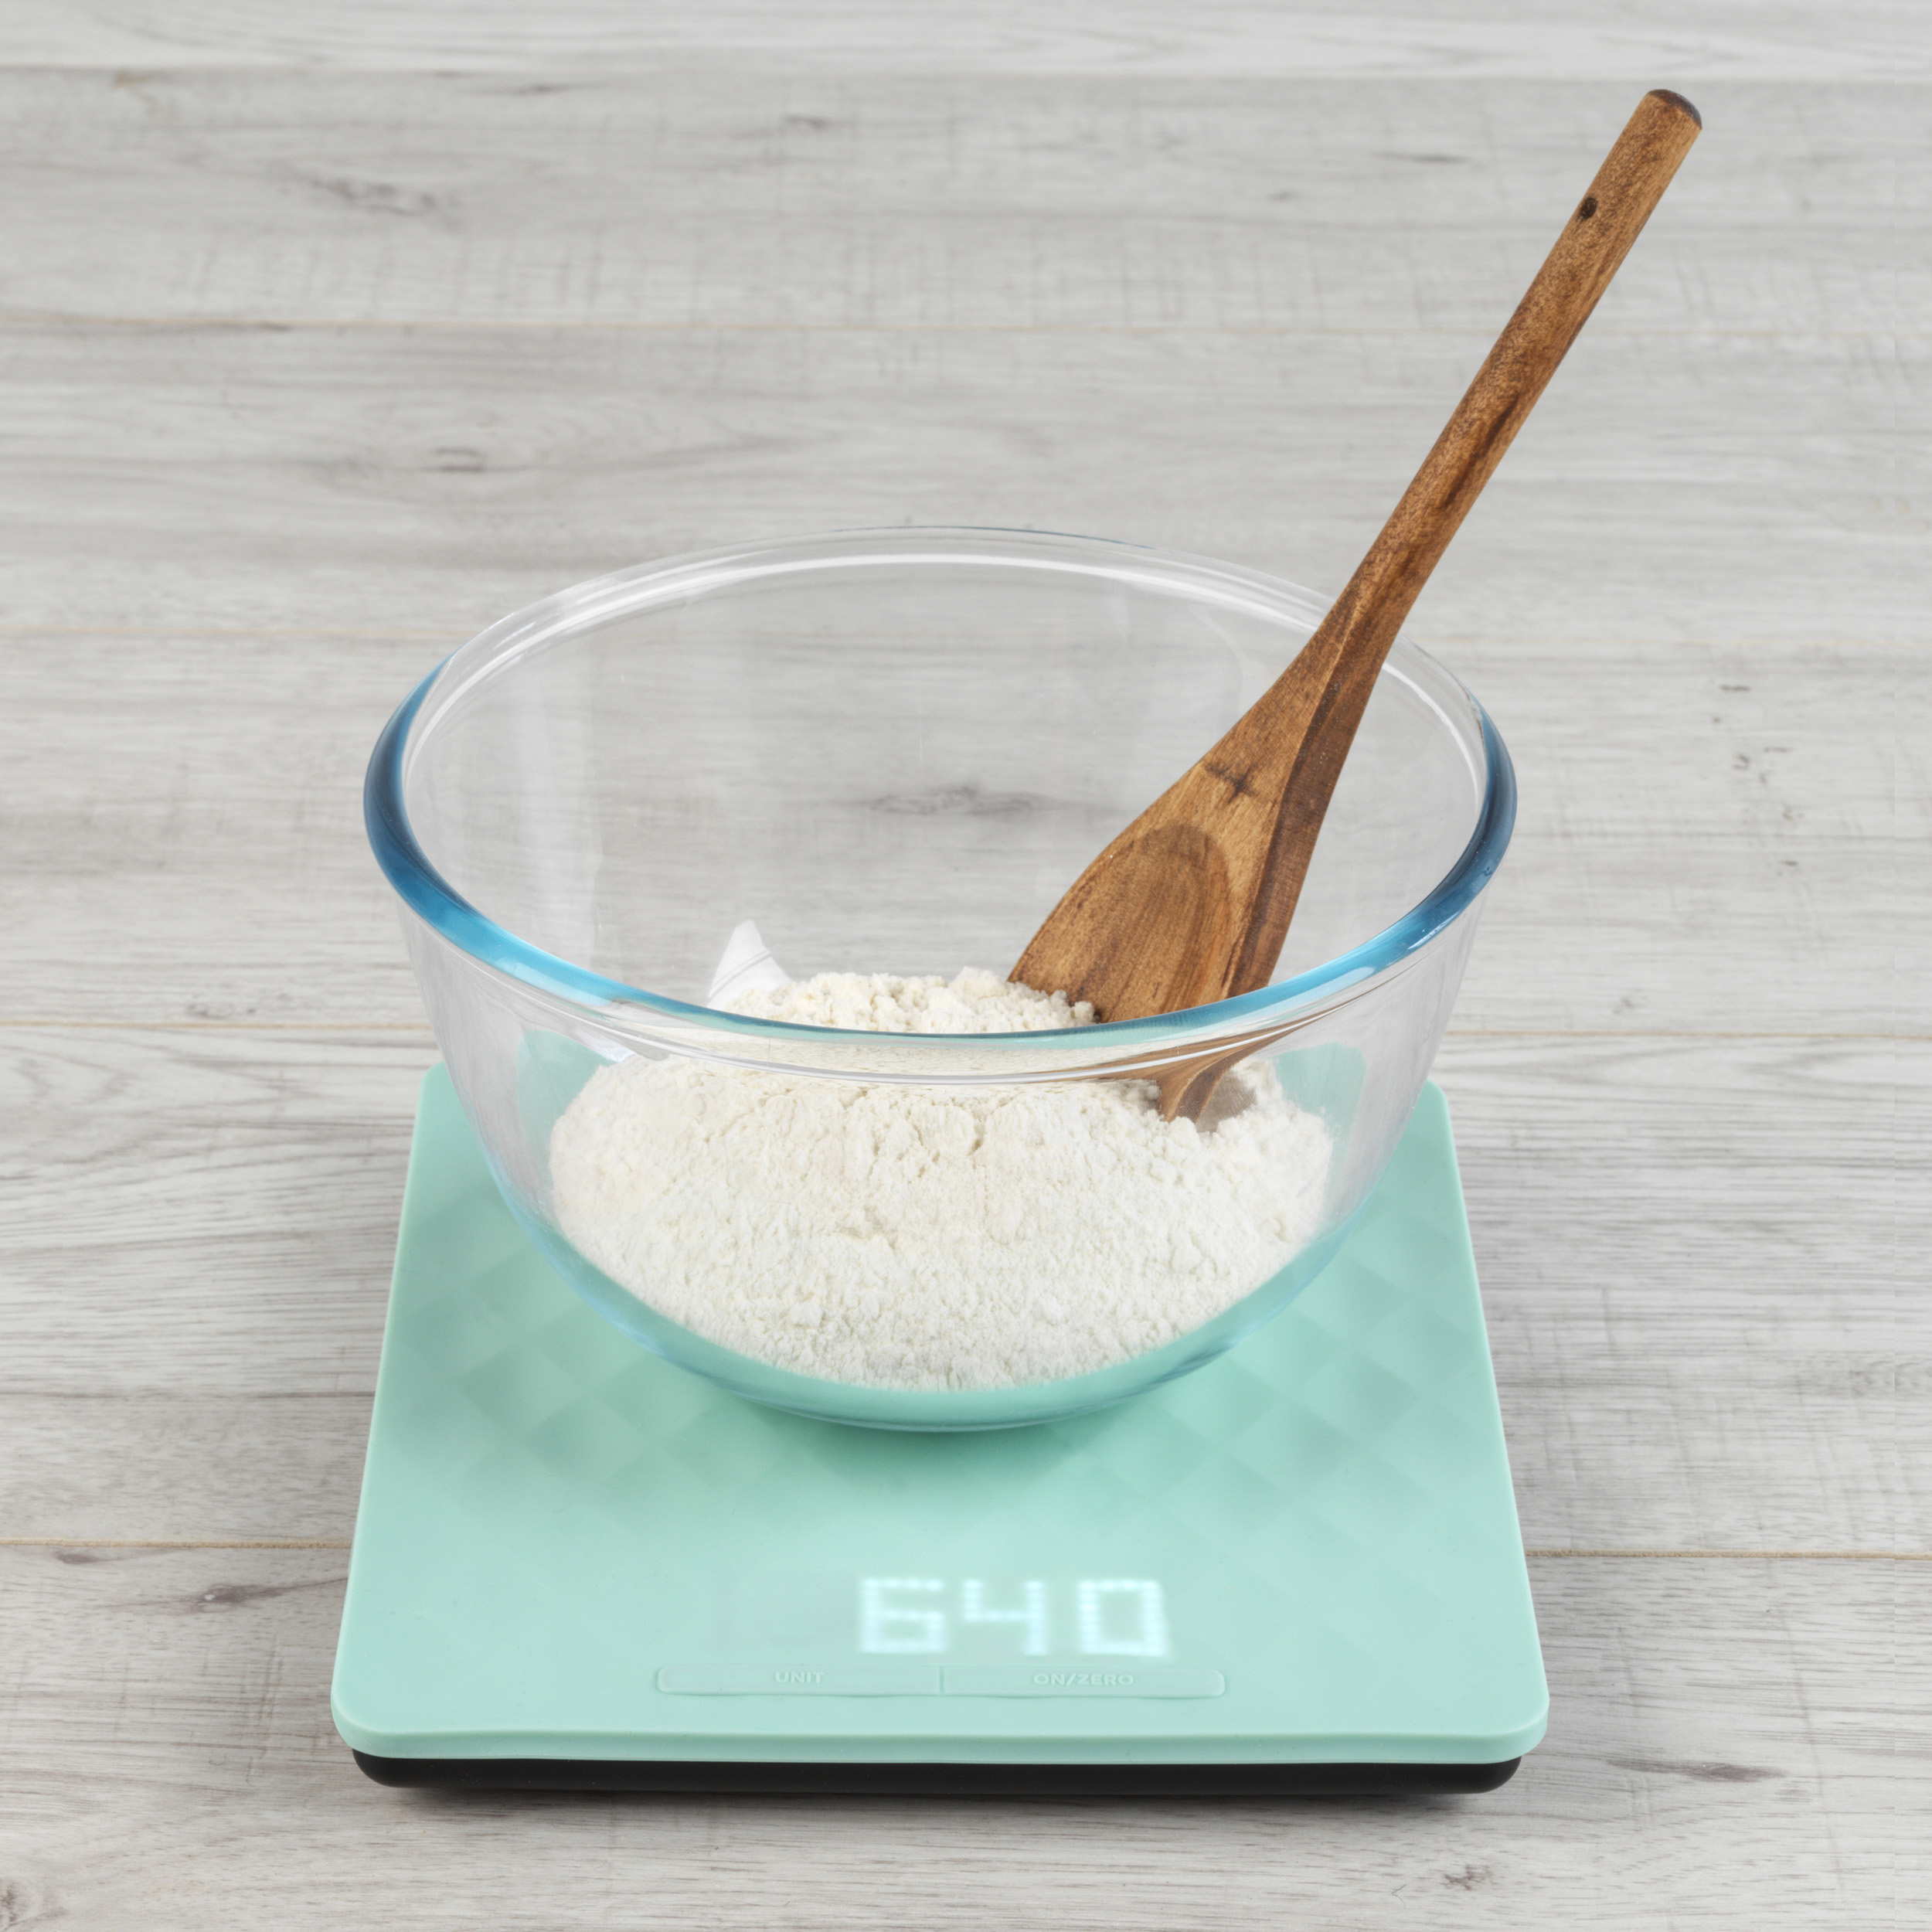 Flour in a bowl with a wooden spoon on Salter scales